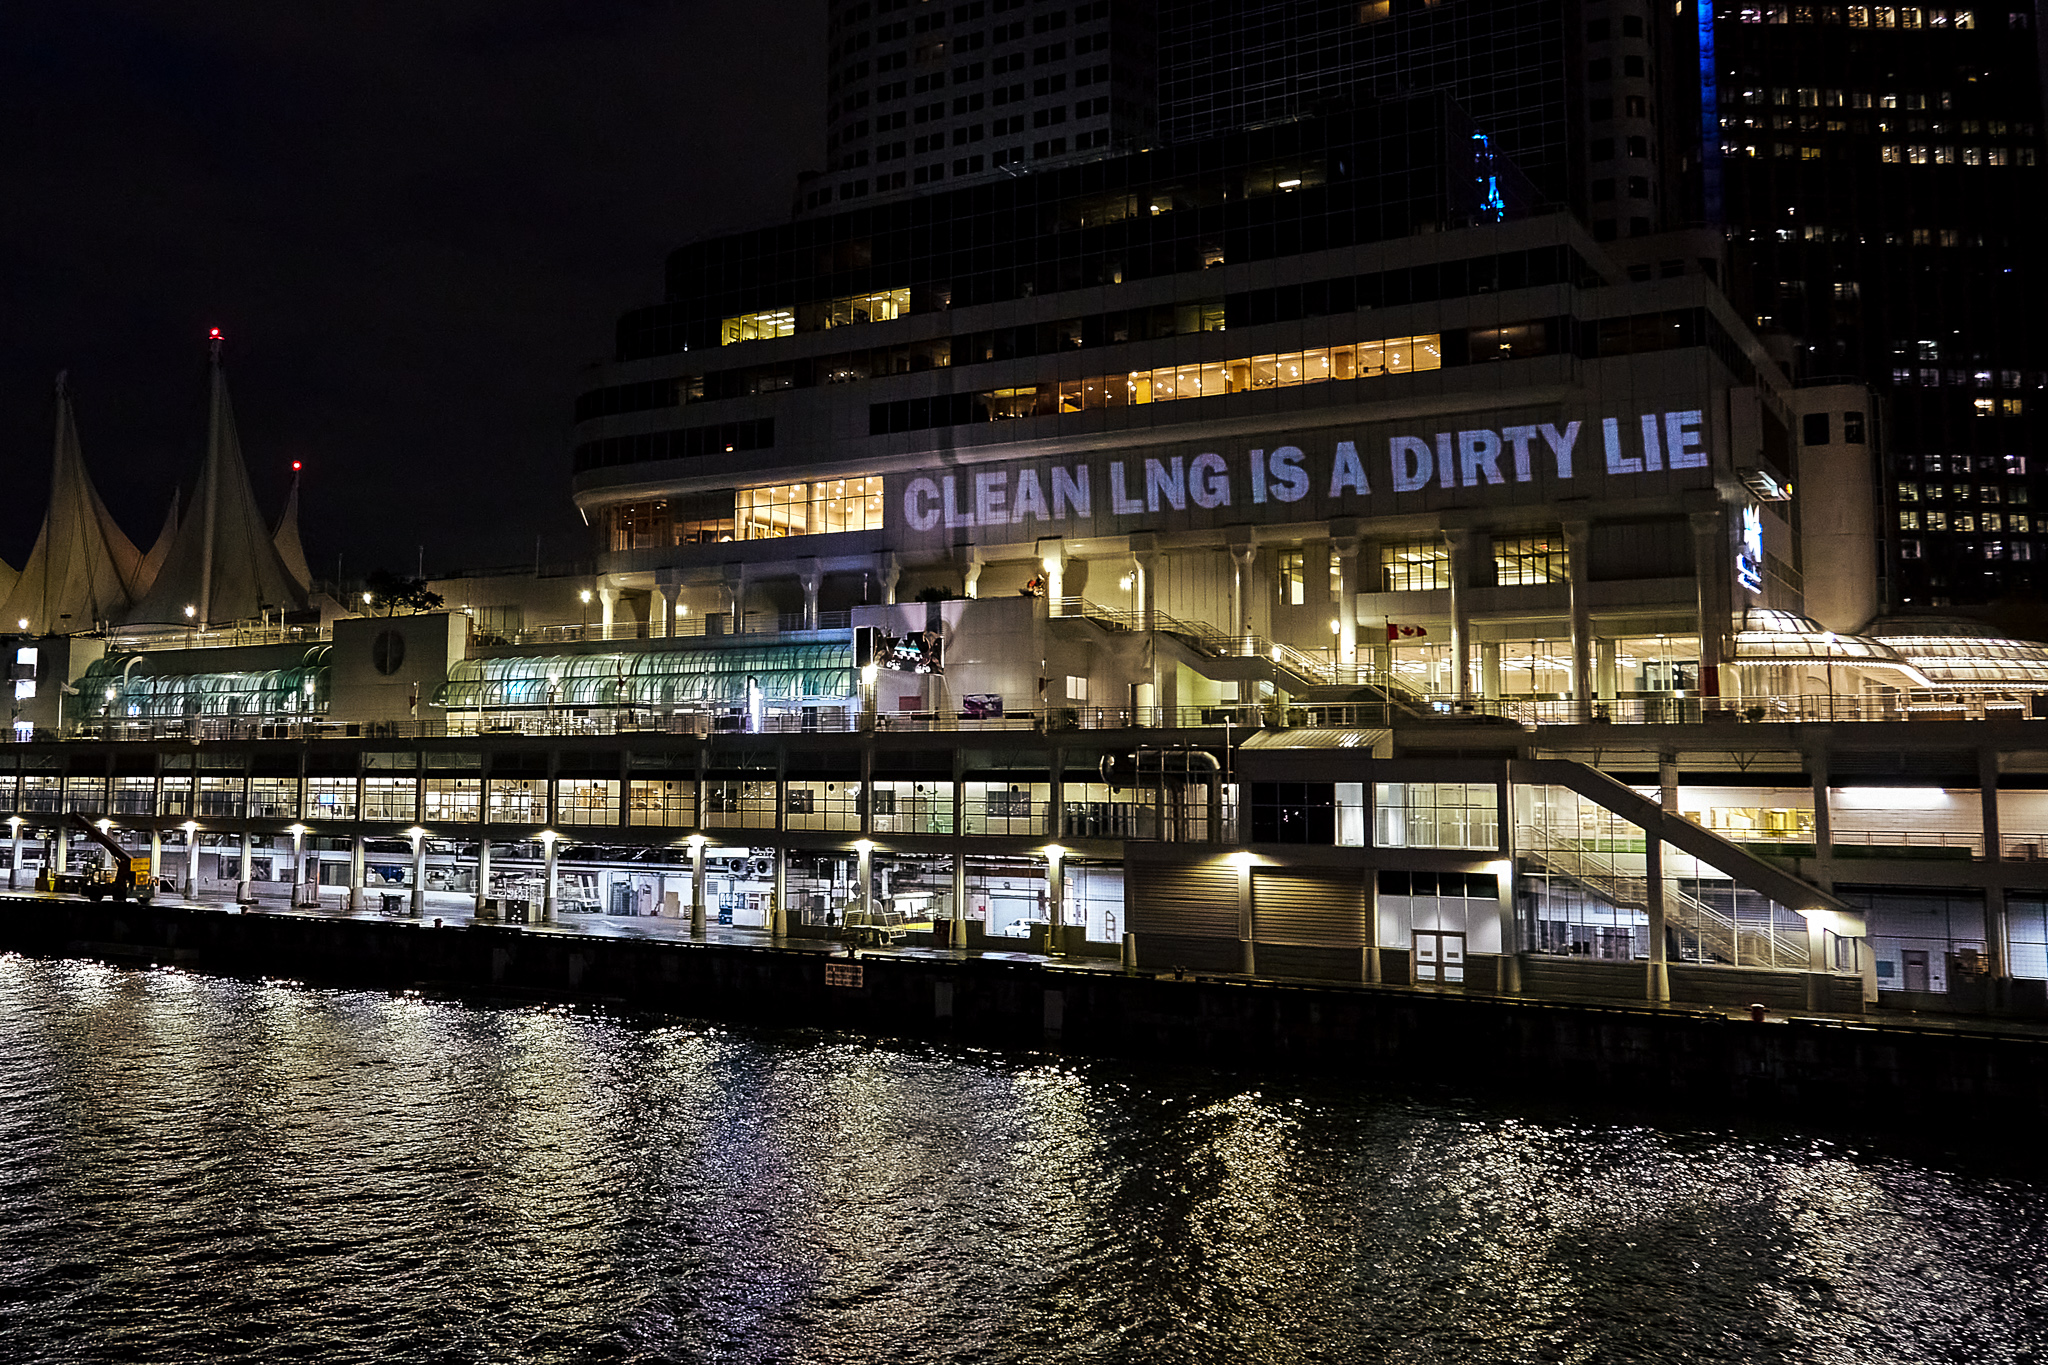 Clean LNG is a lie projected onto Canada Place